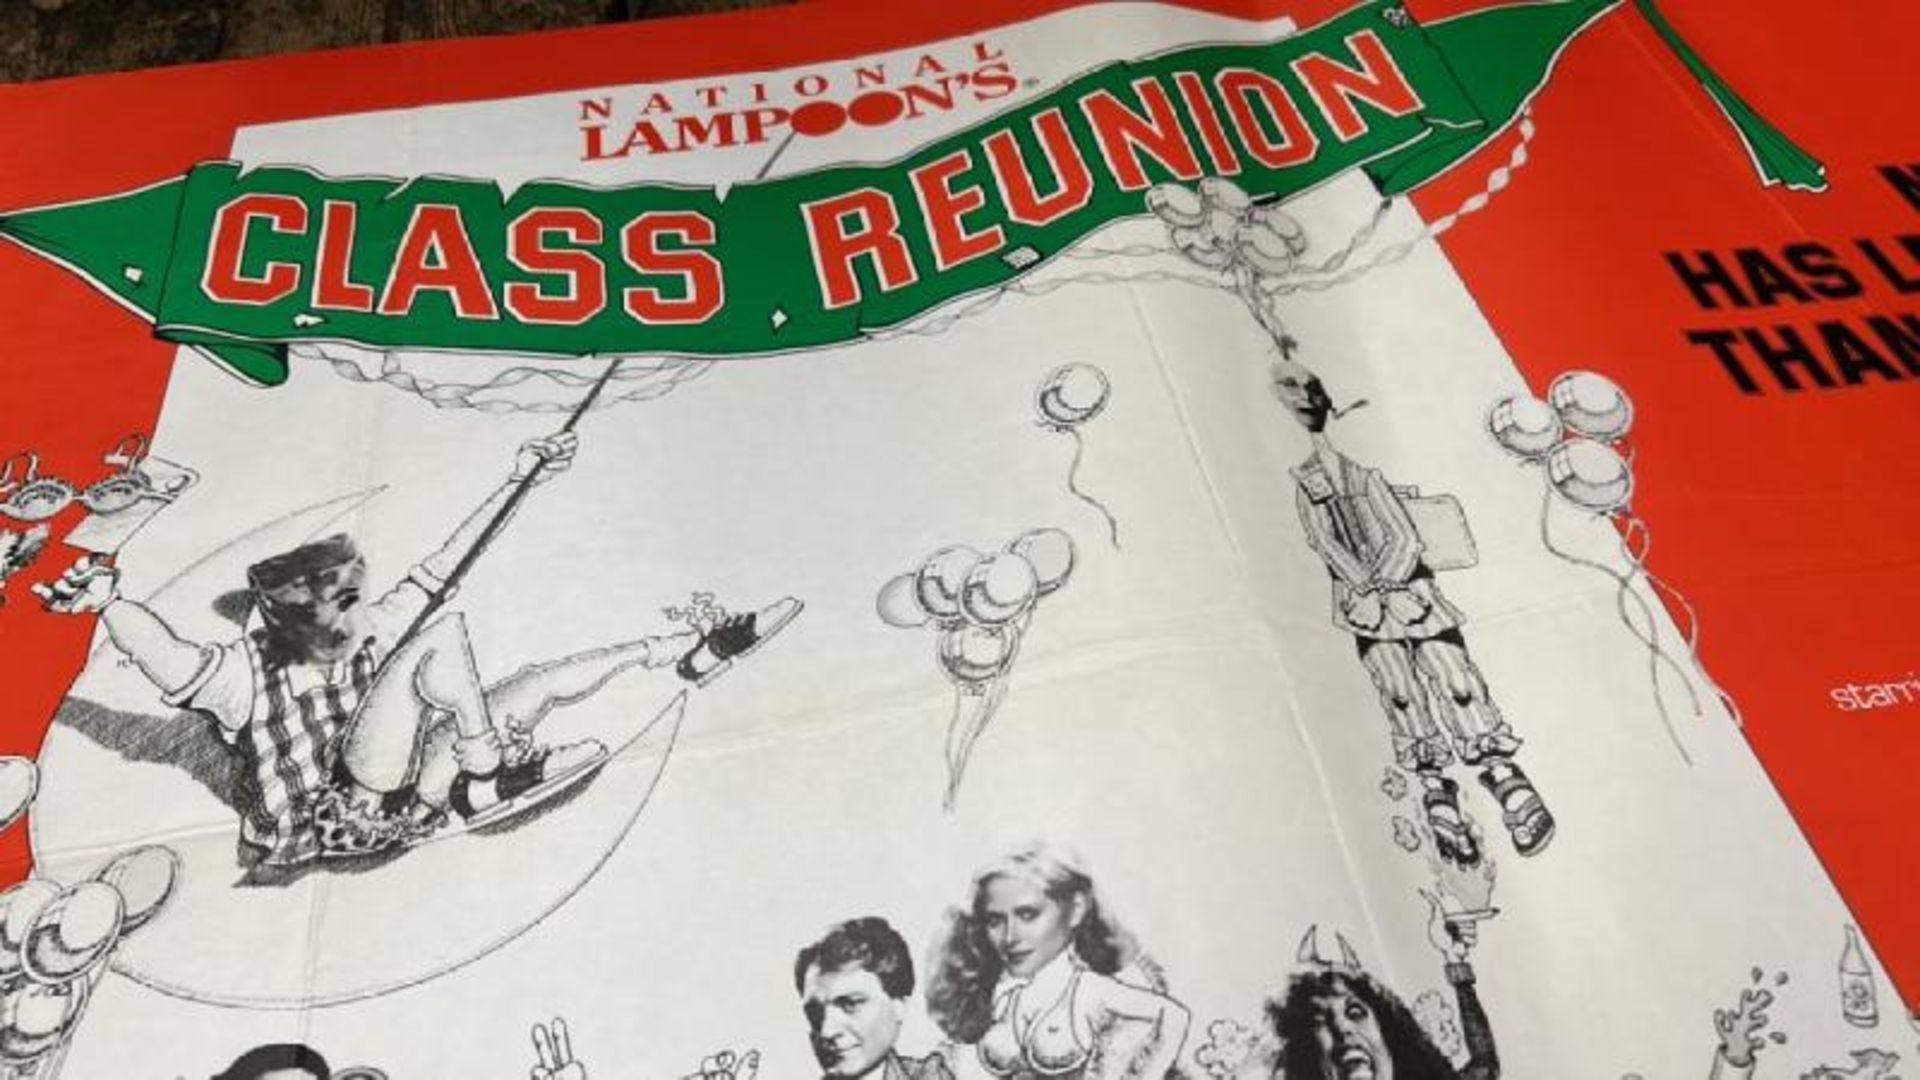 NATIONAL LAMPOON'S CLASS REUNION, ORIGINAL FILM POSTER, PRINTED IN ENGLAND BY W. E. BERRY - Bild 4 aus 4